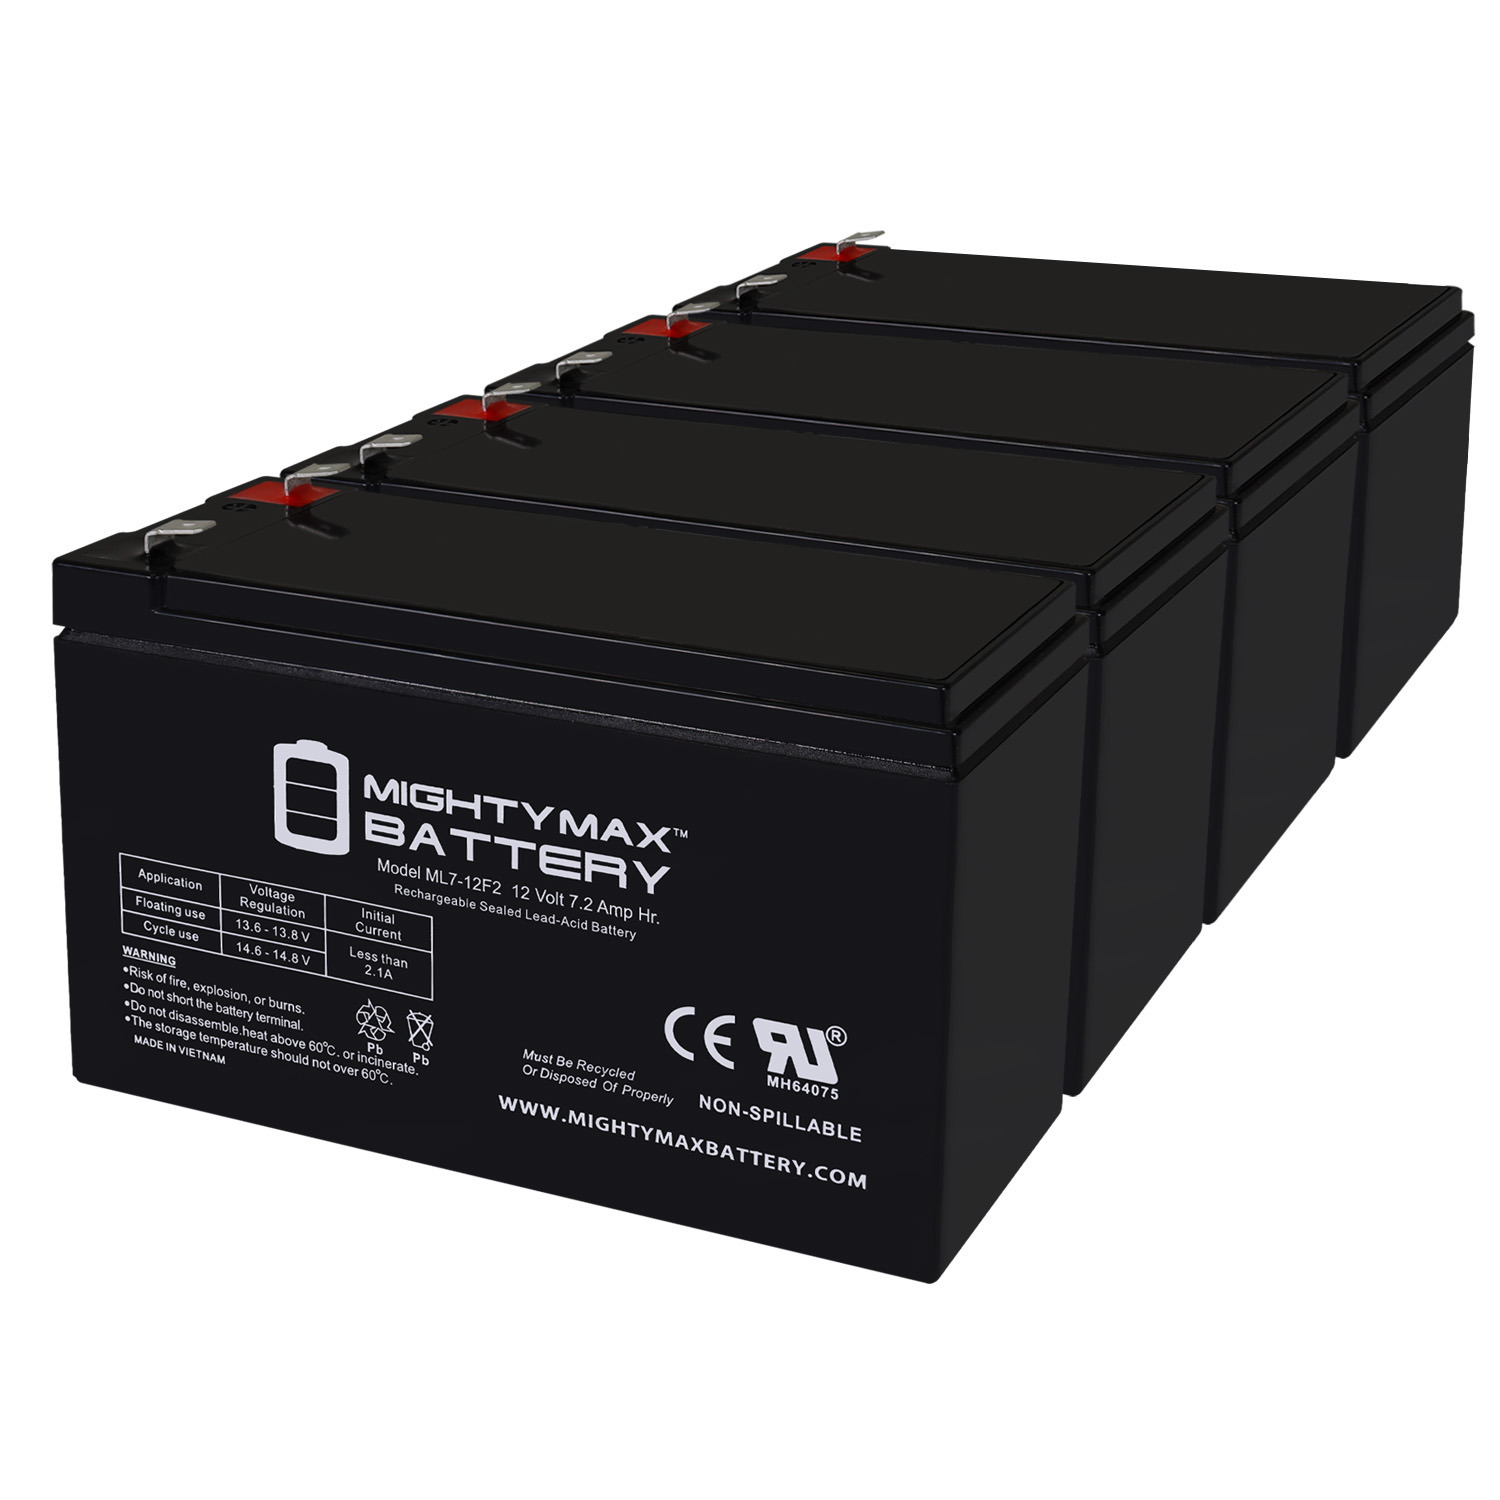 12V 7Ah F2 Replacement Battery for PowerWare 05146074-6591 - 4 Pack